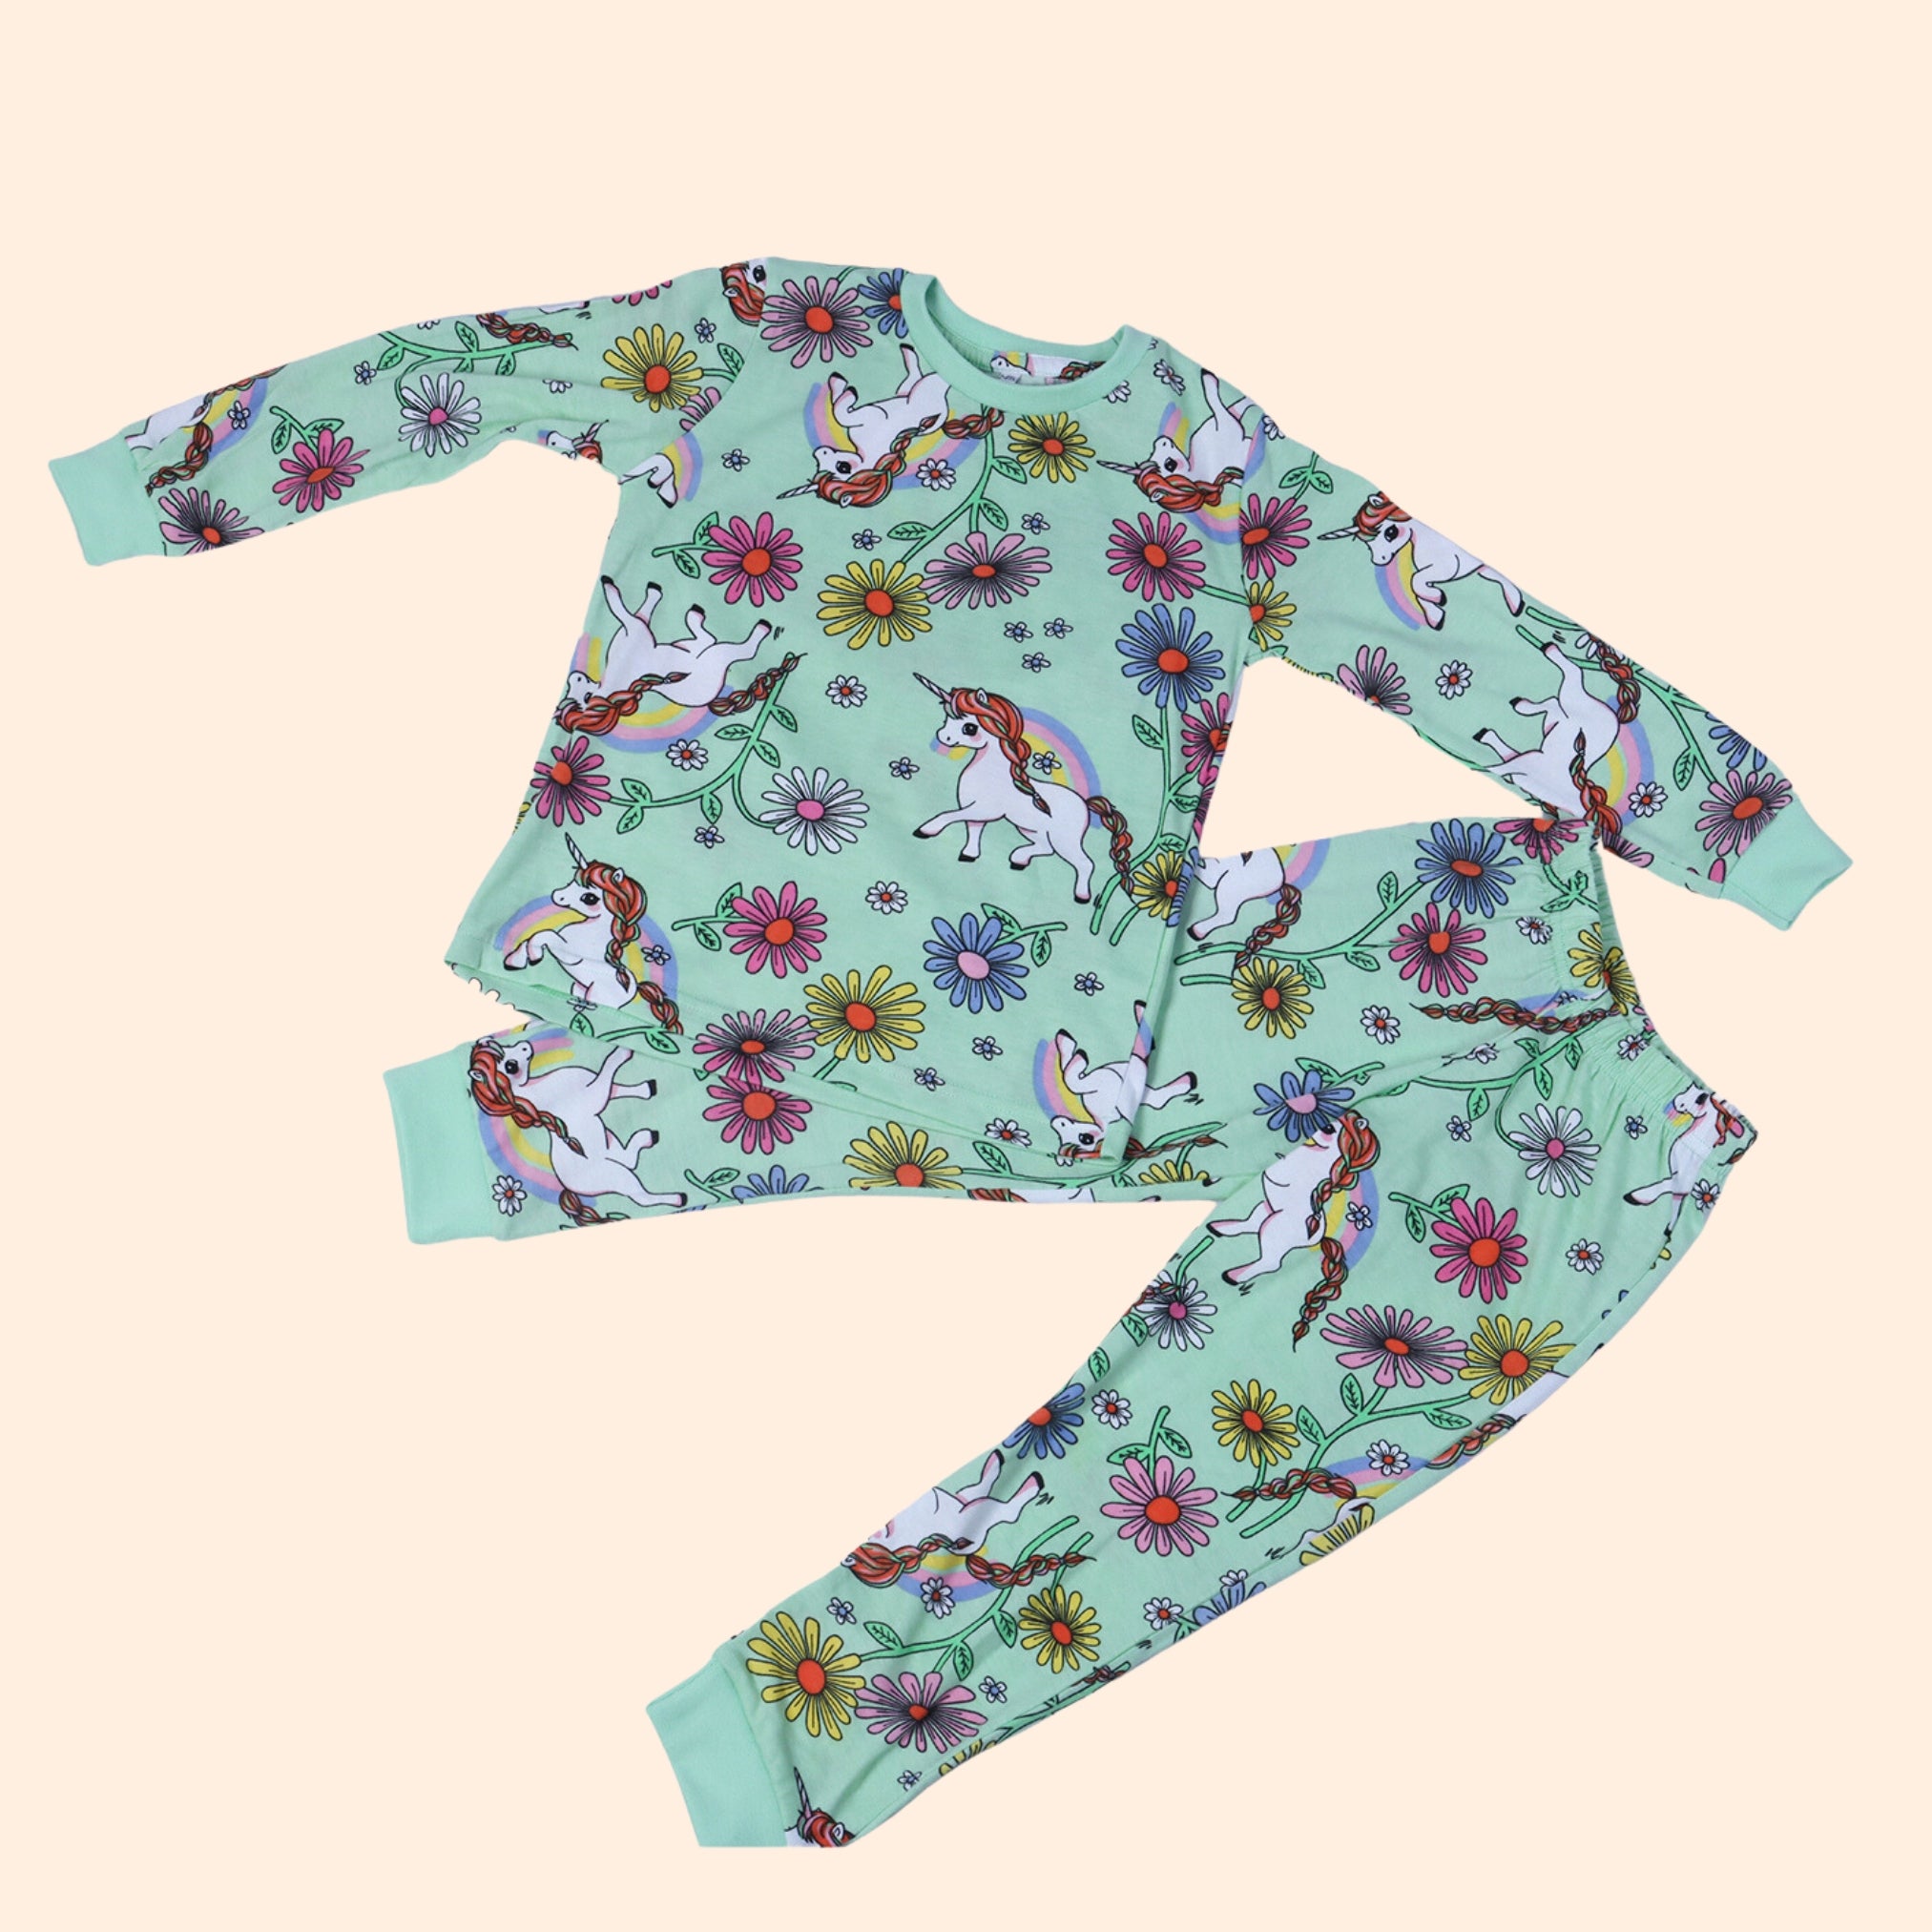 Full Sleeve Night Suit For Boy In Green Colour - Unicorn & Floral variant